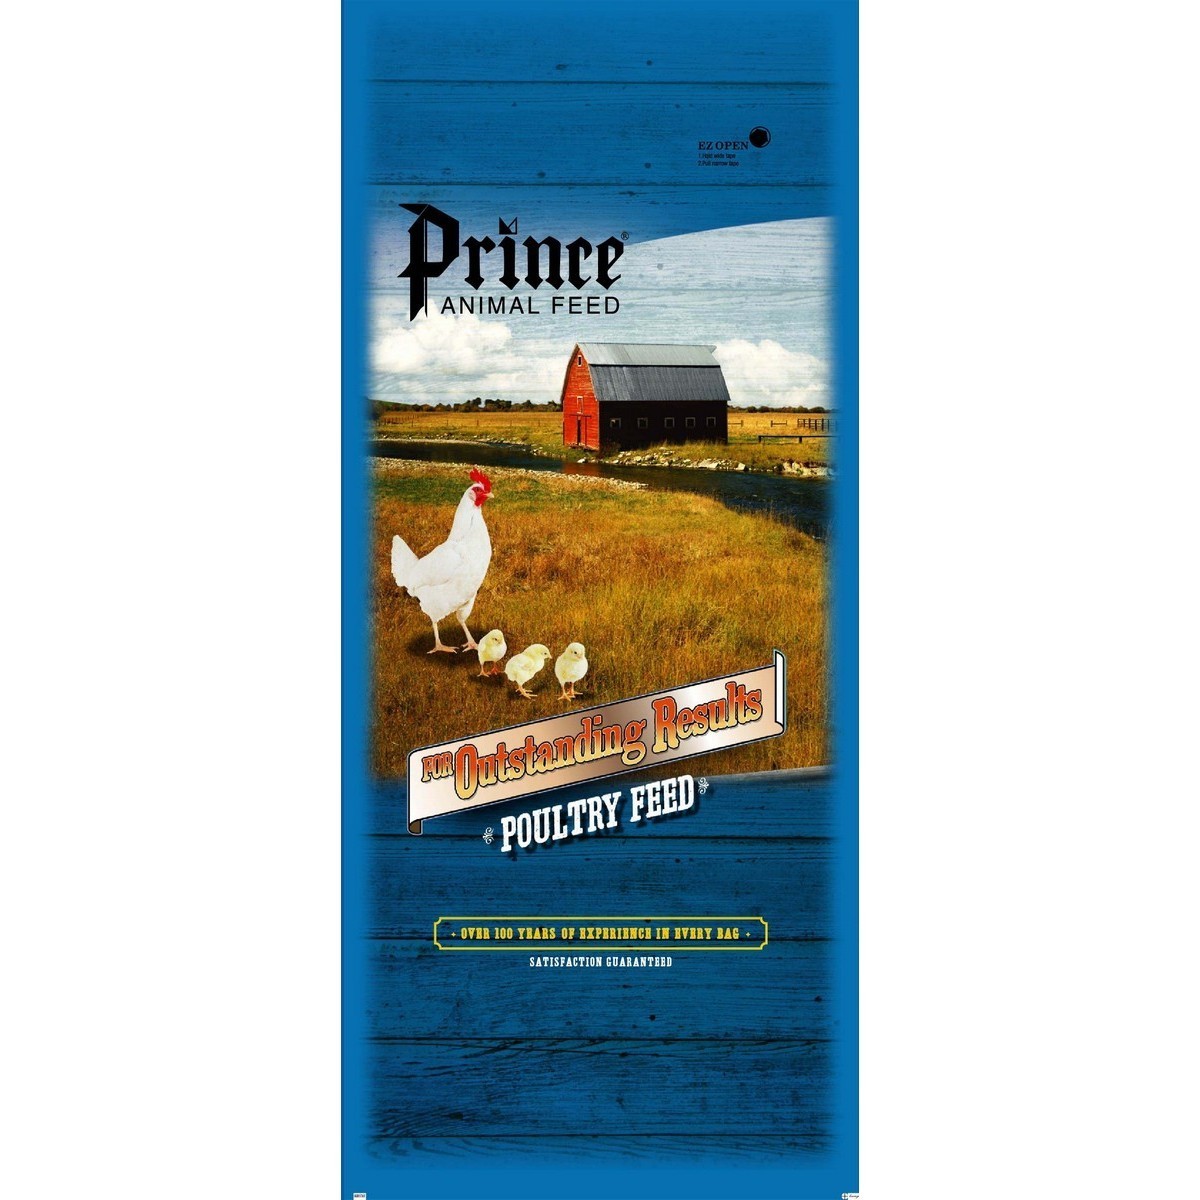 Picture of Prince Premium Feed 001162 50 lbs Poultry Concentrate 36 Percent Meal